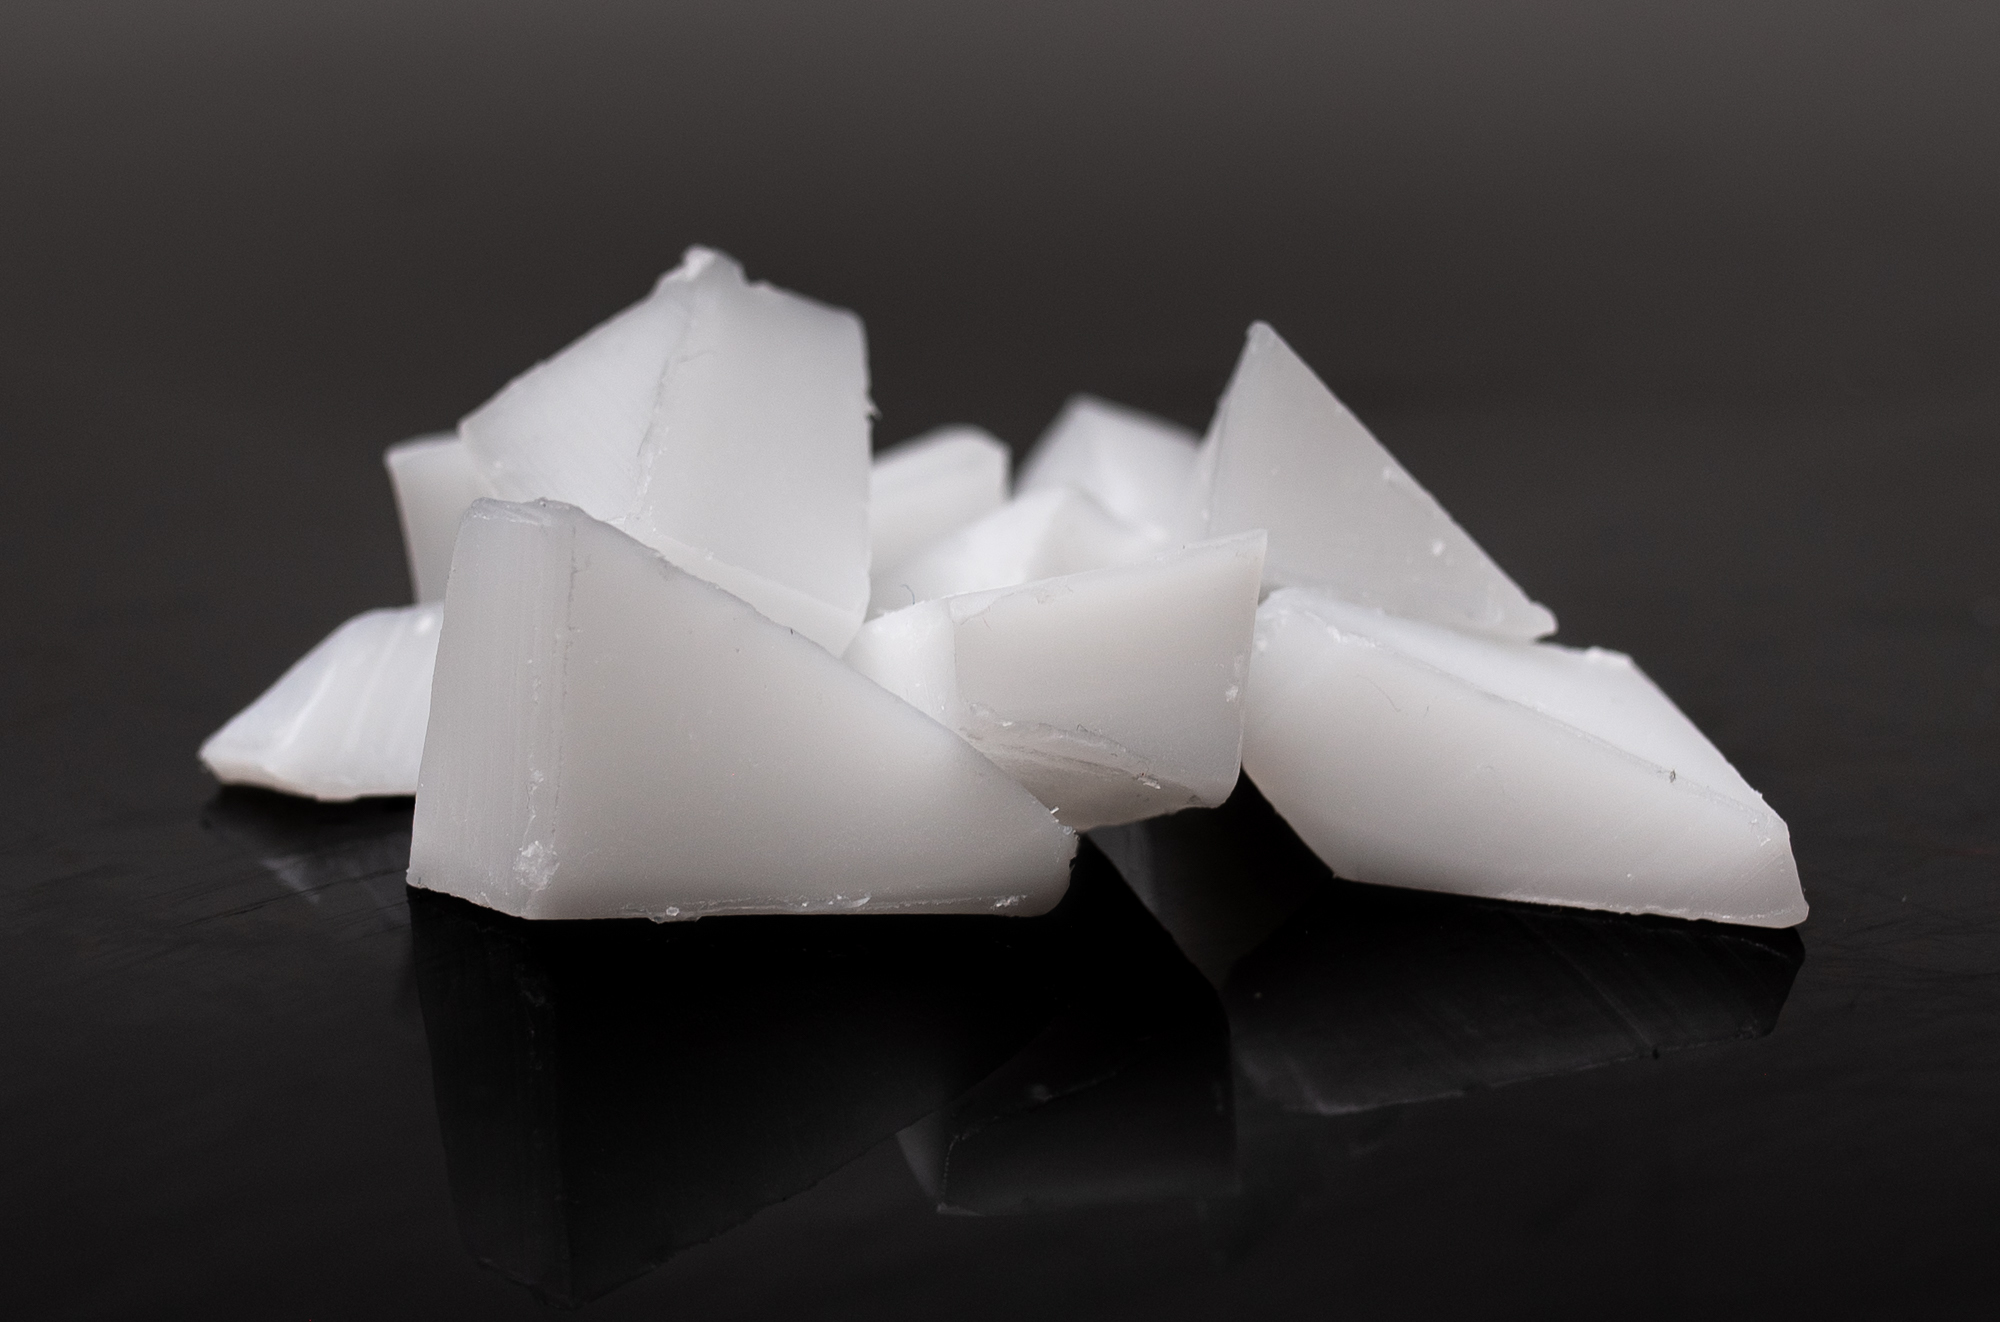 Sharp-cornered slices of paraffin wax. The wax is whiteish and slightly transparent. 